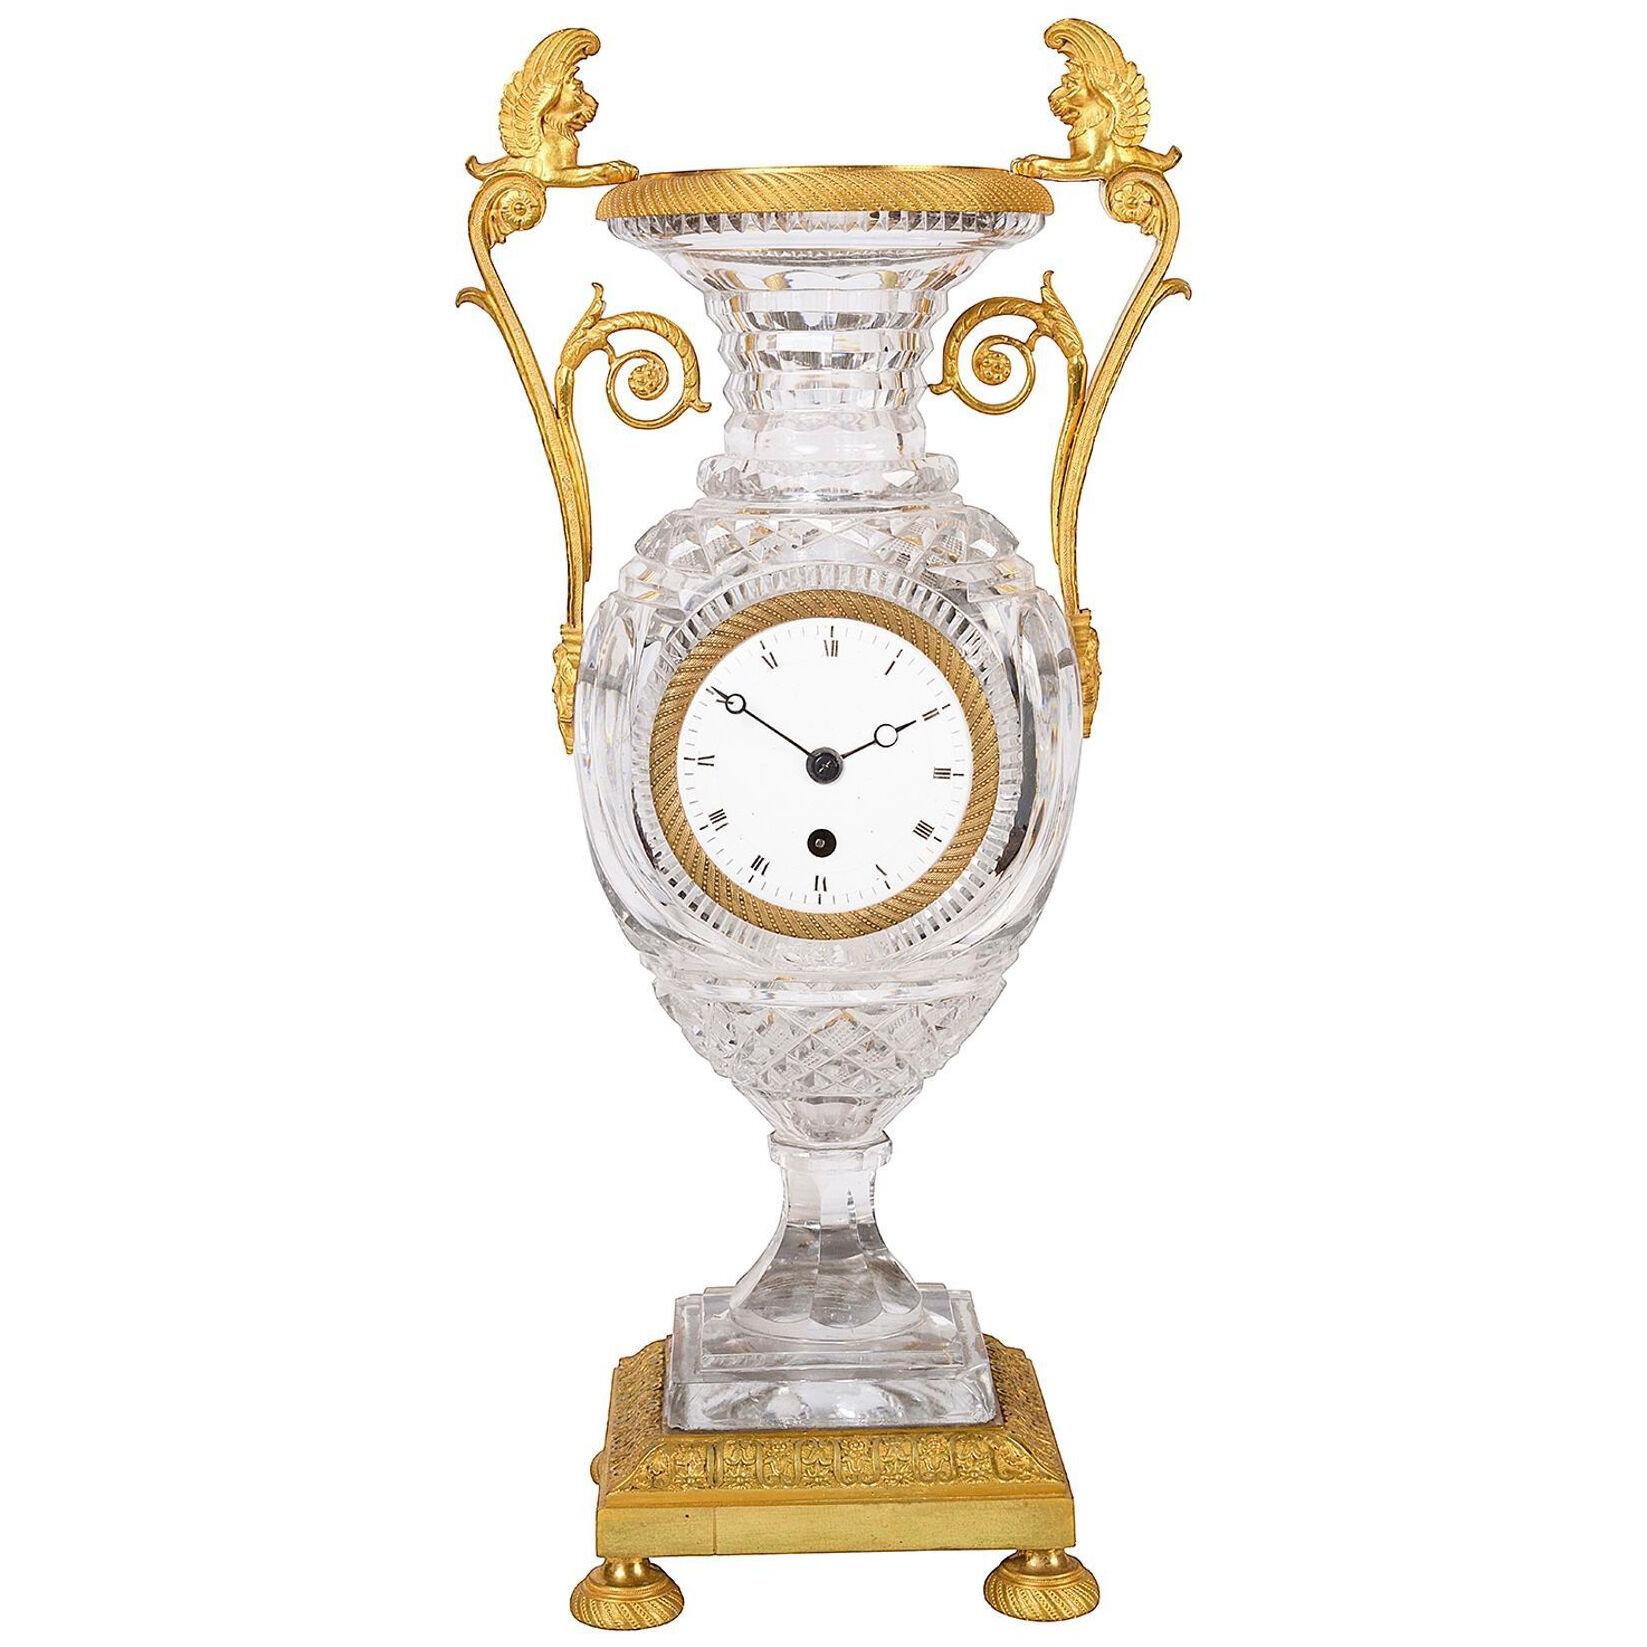 A fine quality French Empire Baccarat style crystal vase clock, circa 1860